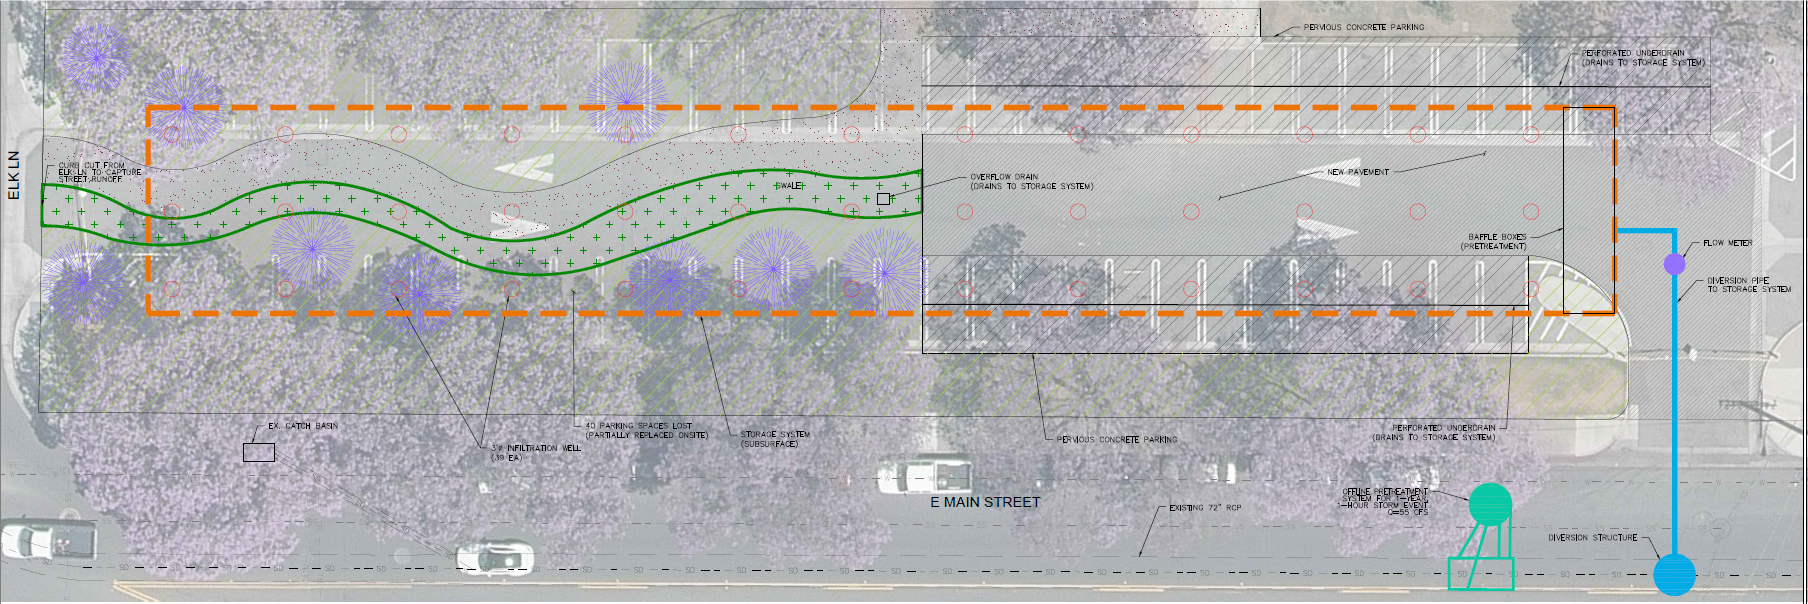 Public Works New Washington Well Project Site Plan